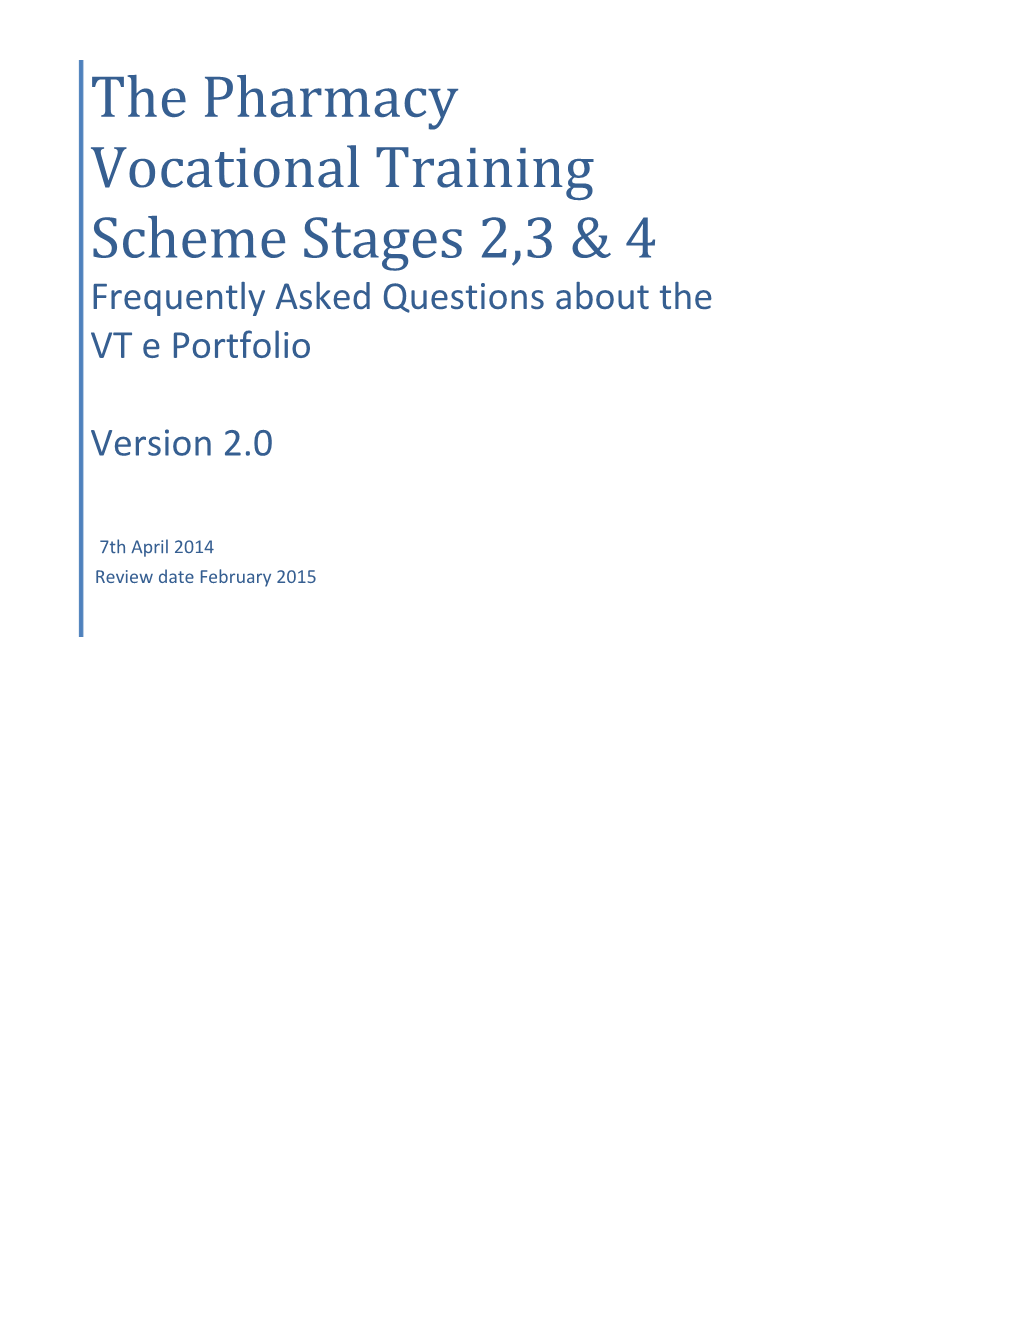 Frequently Asked Questions About the VT2 E Portfolio